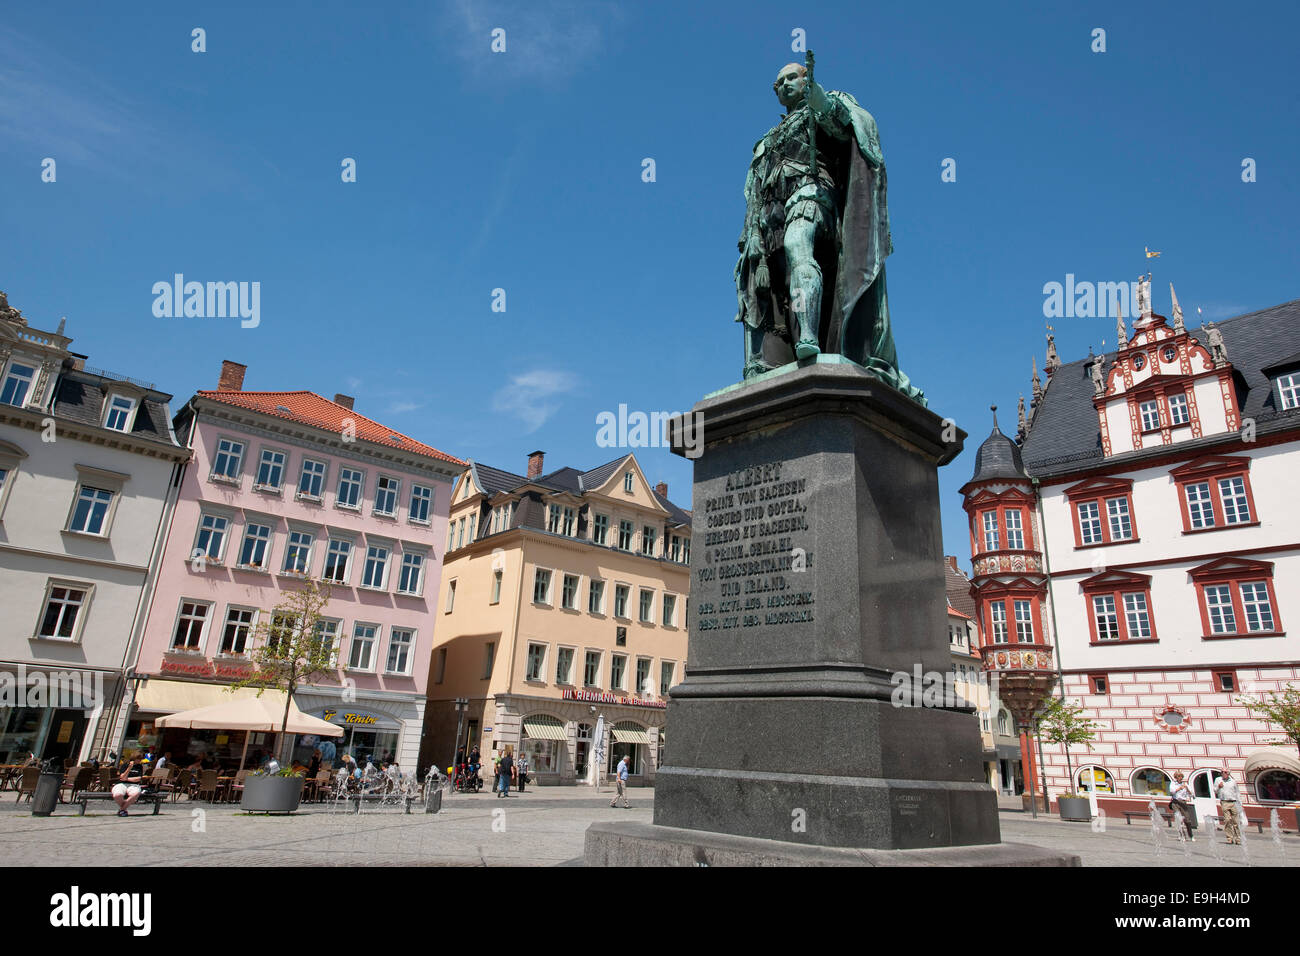 Marketplace with Prince Albert Memorial, memorial to Albert of Saxe-Coburg and Gotha, with the Coburg Stadthaus city hall on the Stock Photo